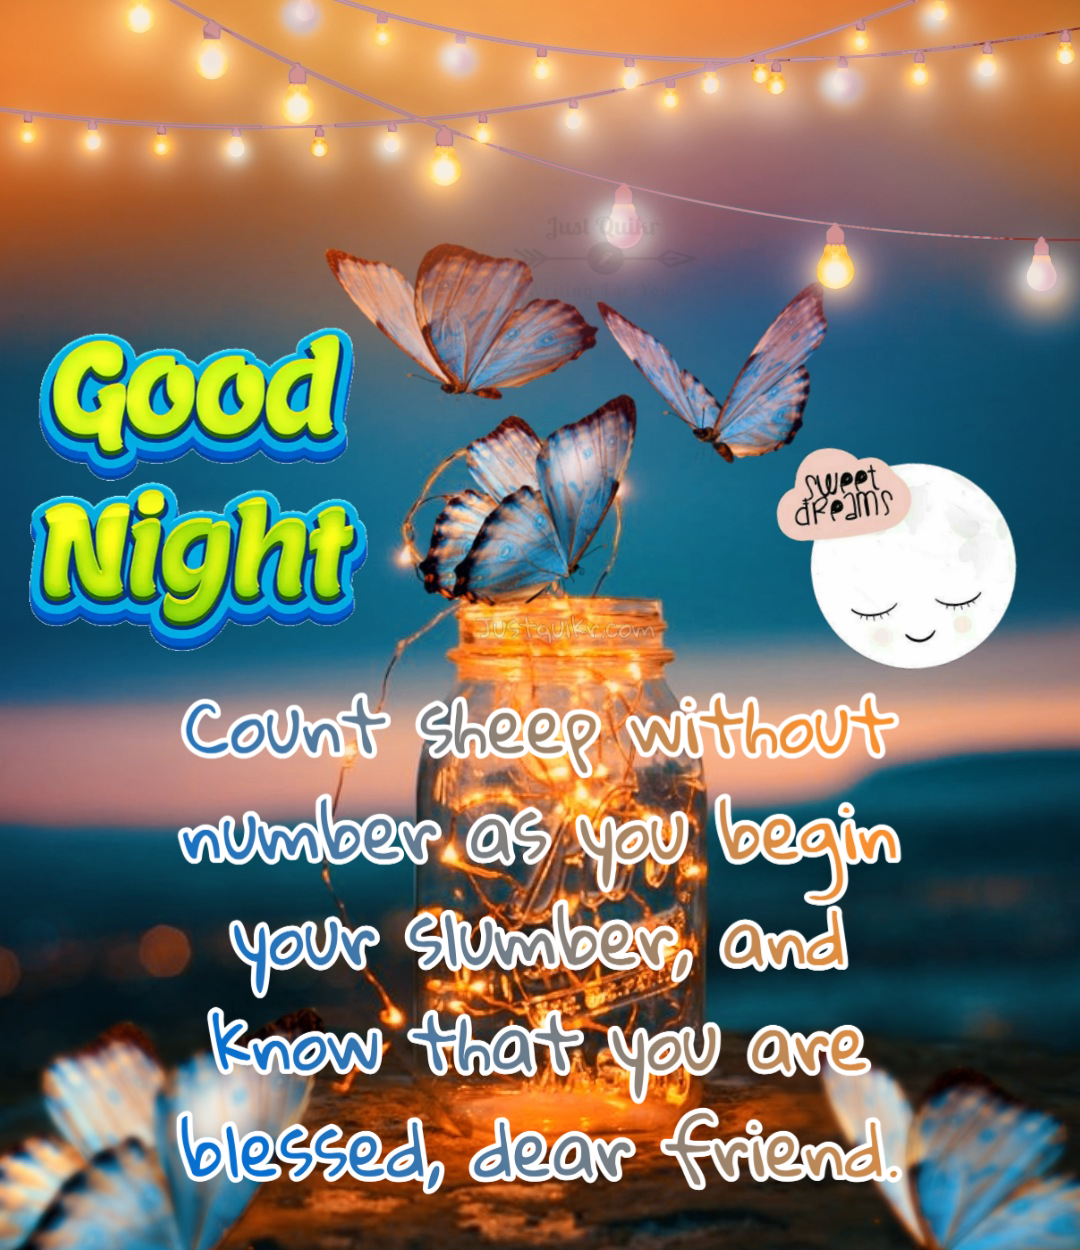 Good Night HD Pics Images For Dear Friend 